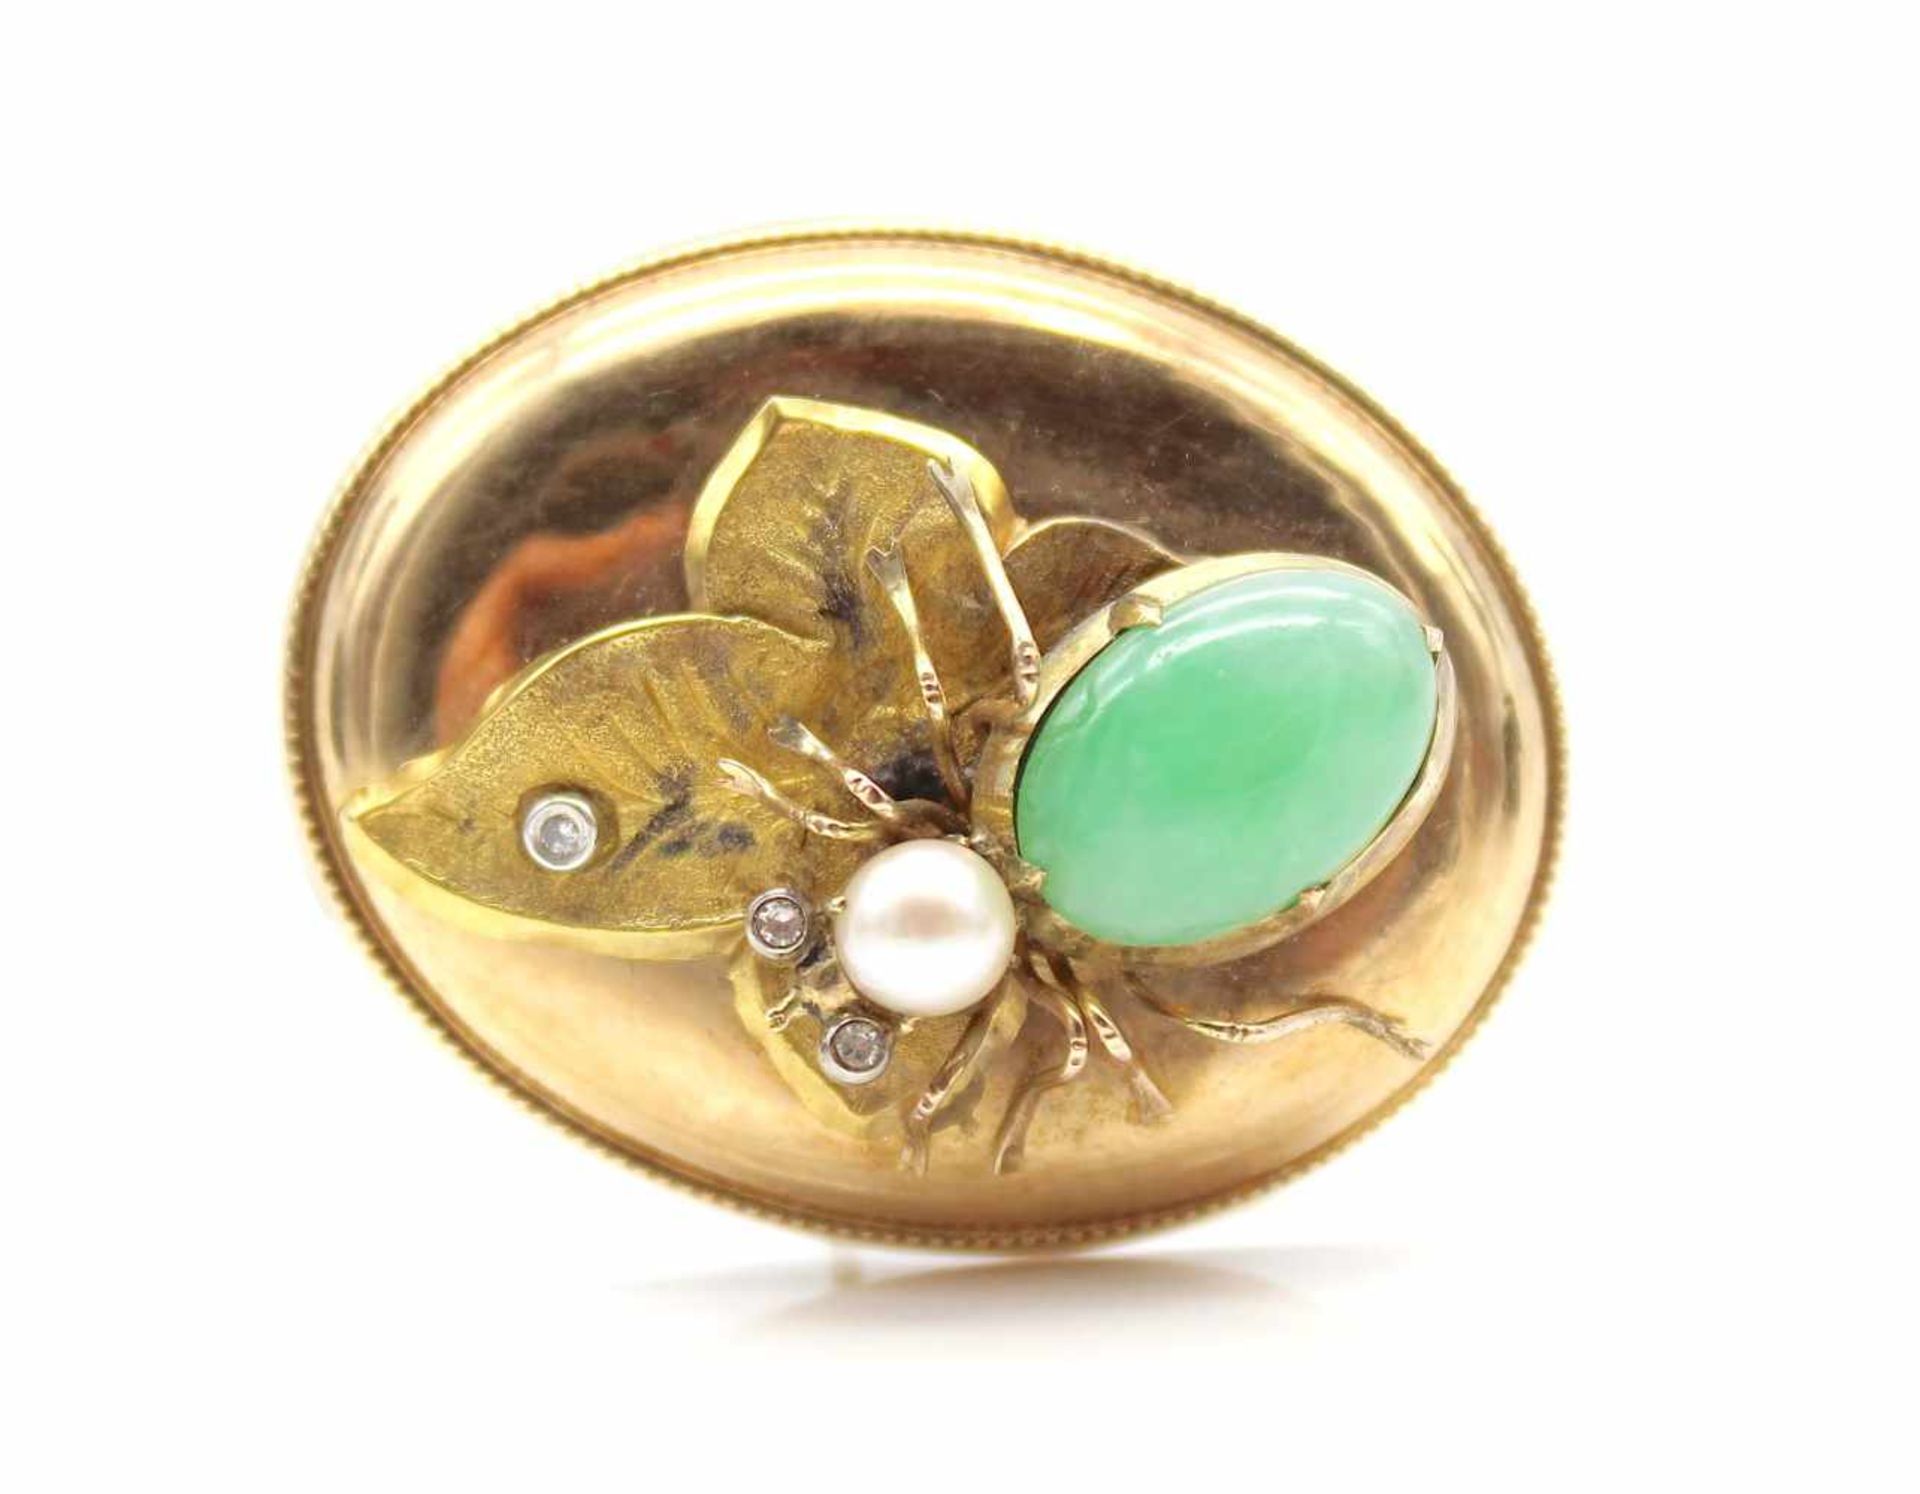 Old pendant / brooch checked for 585 gold with 3 diamonds, 1 cultured pearl and 1 jadeite.Weight - Bild 2 aus 4